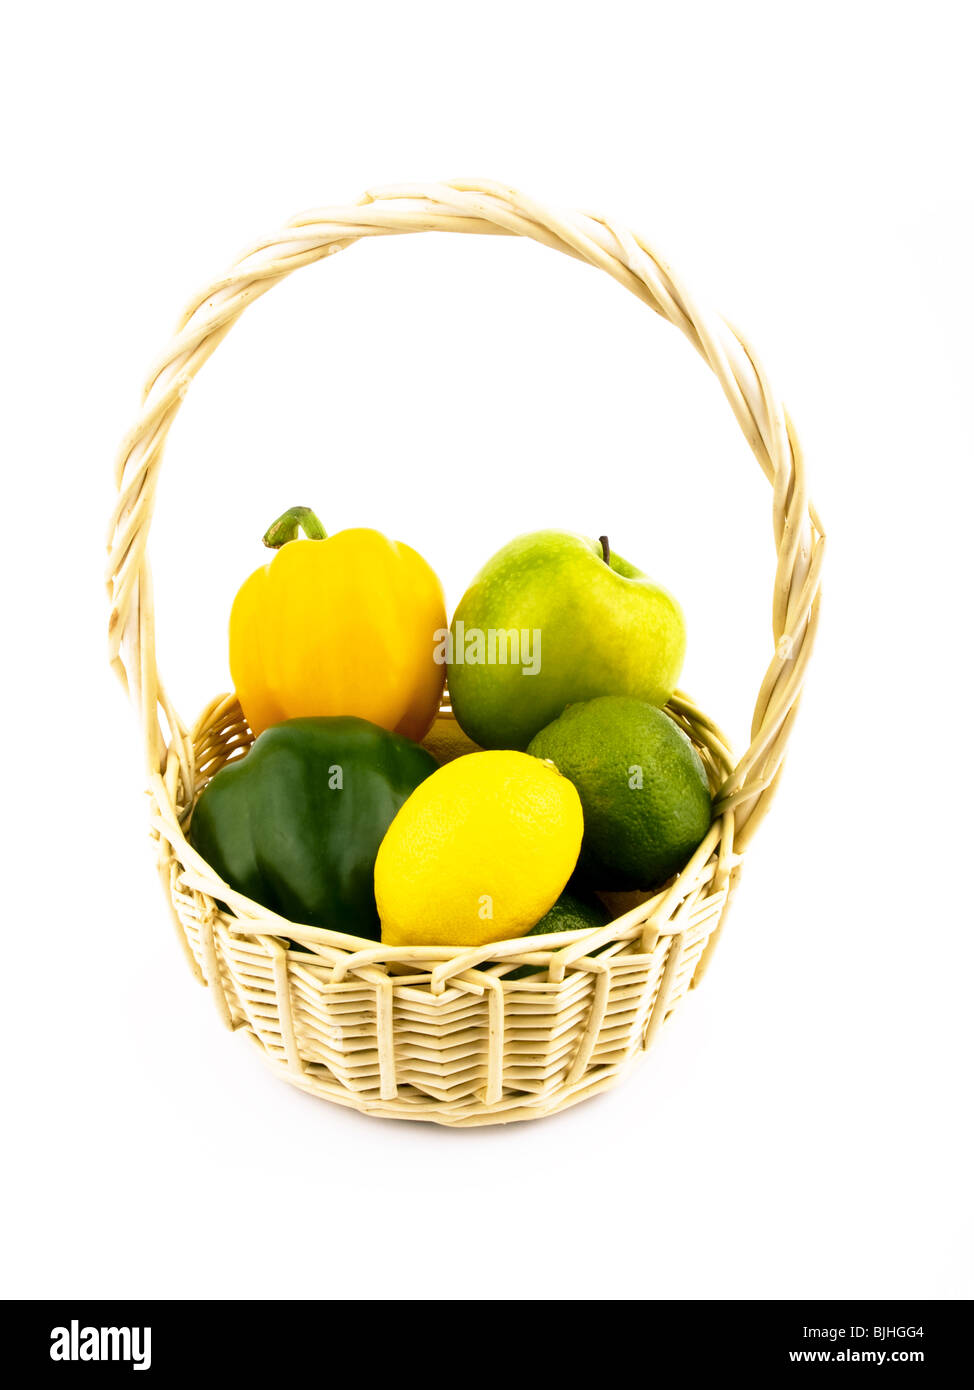 Lemons, limes, paprika and apple in basket on white background Stock Photo